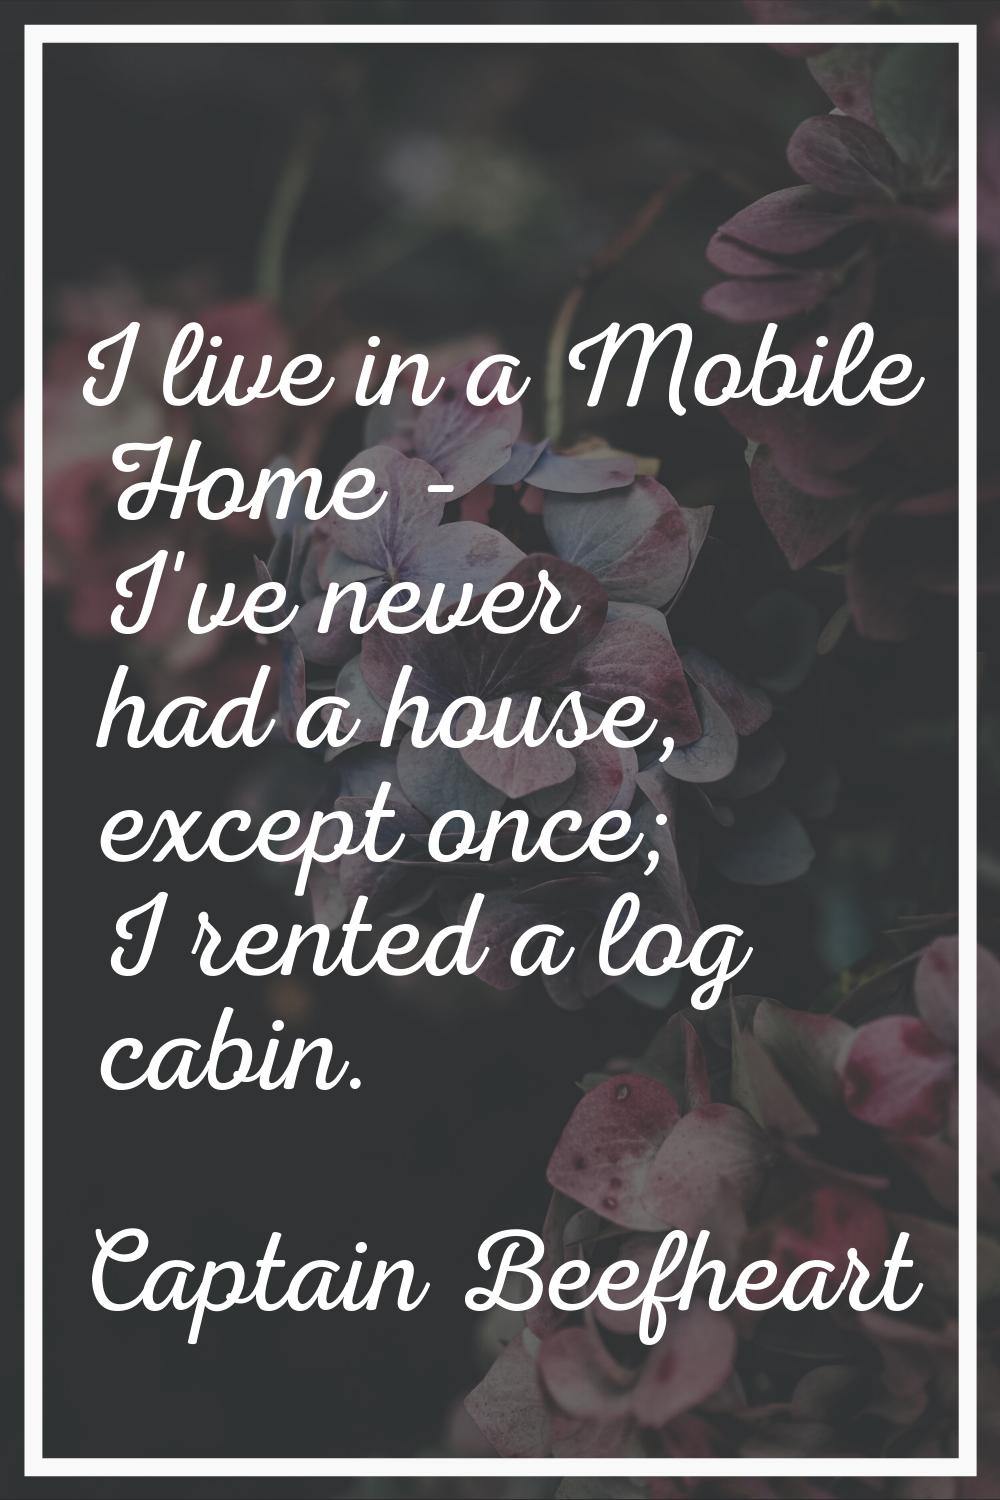 I live in a Mobile Home - I've never had a house, except once; I rented a log cabin.